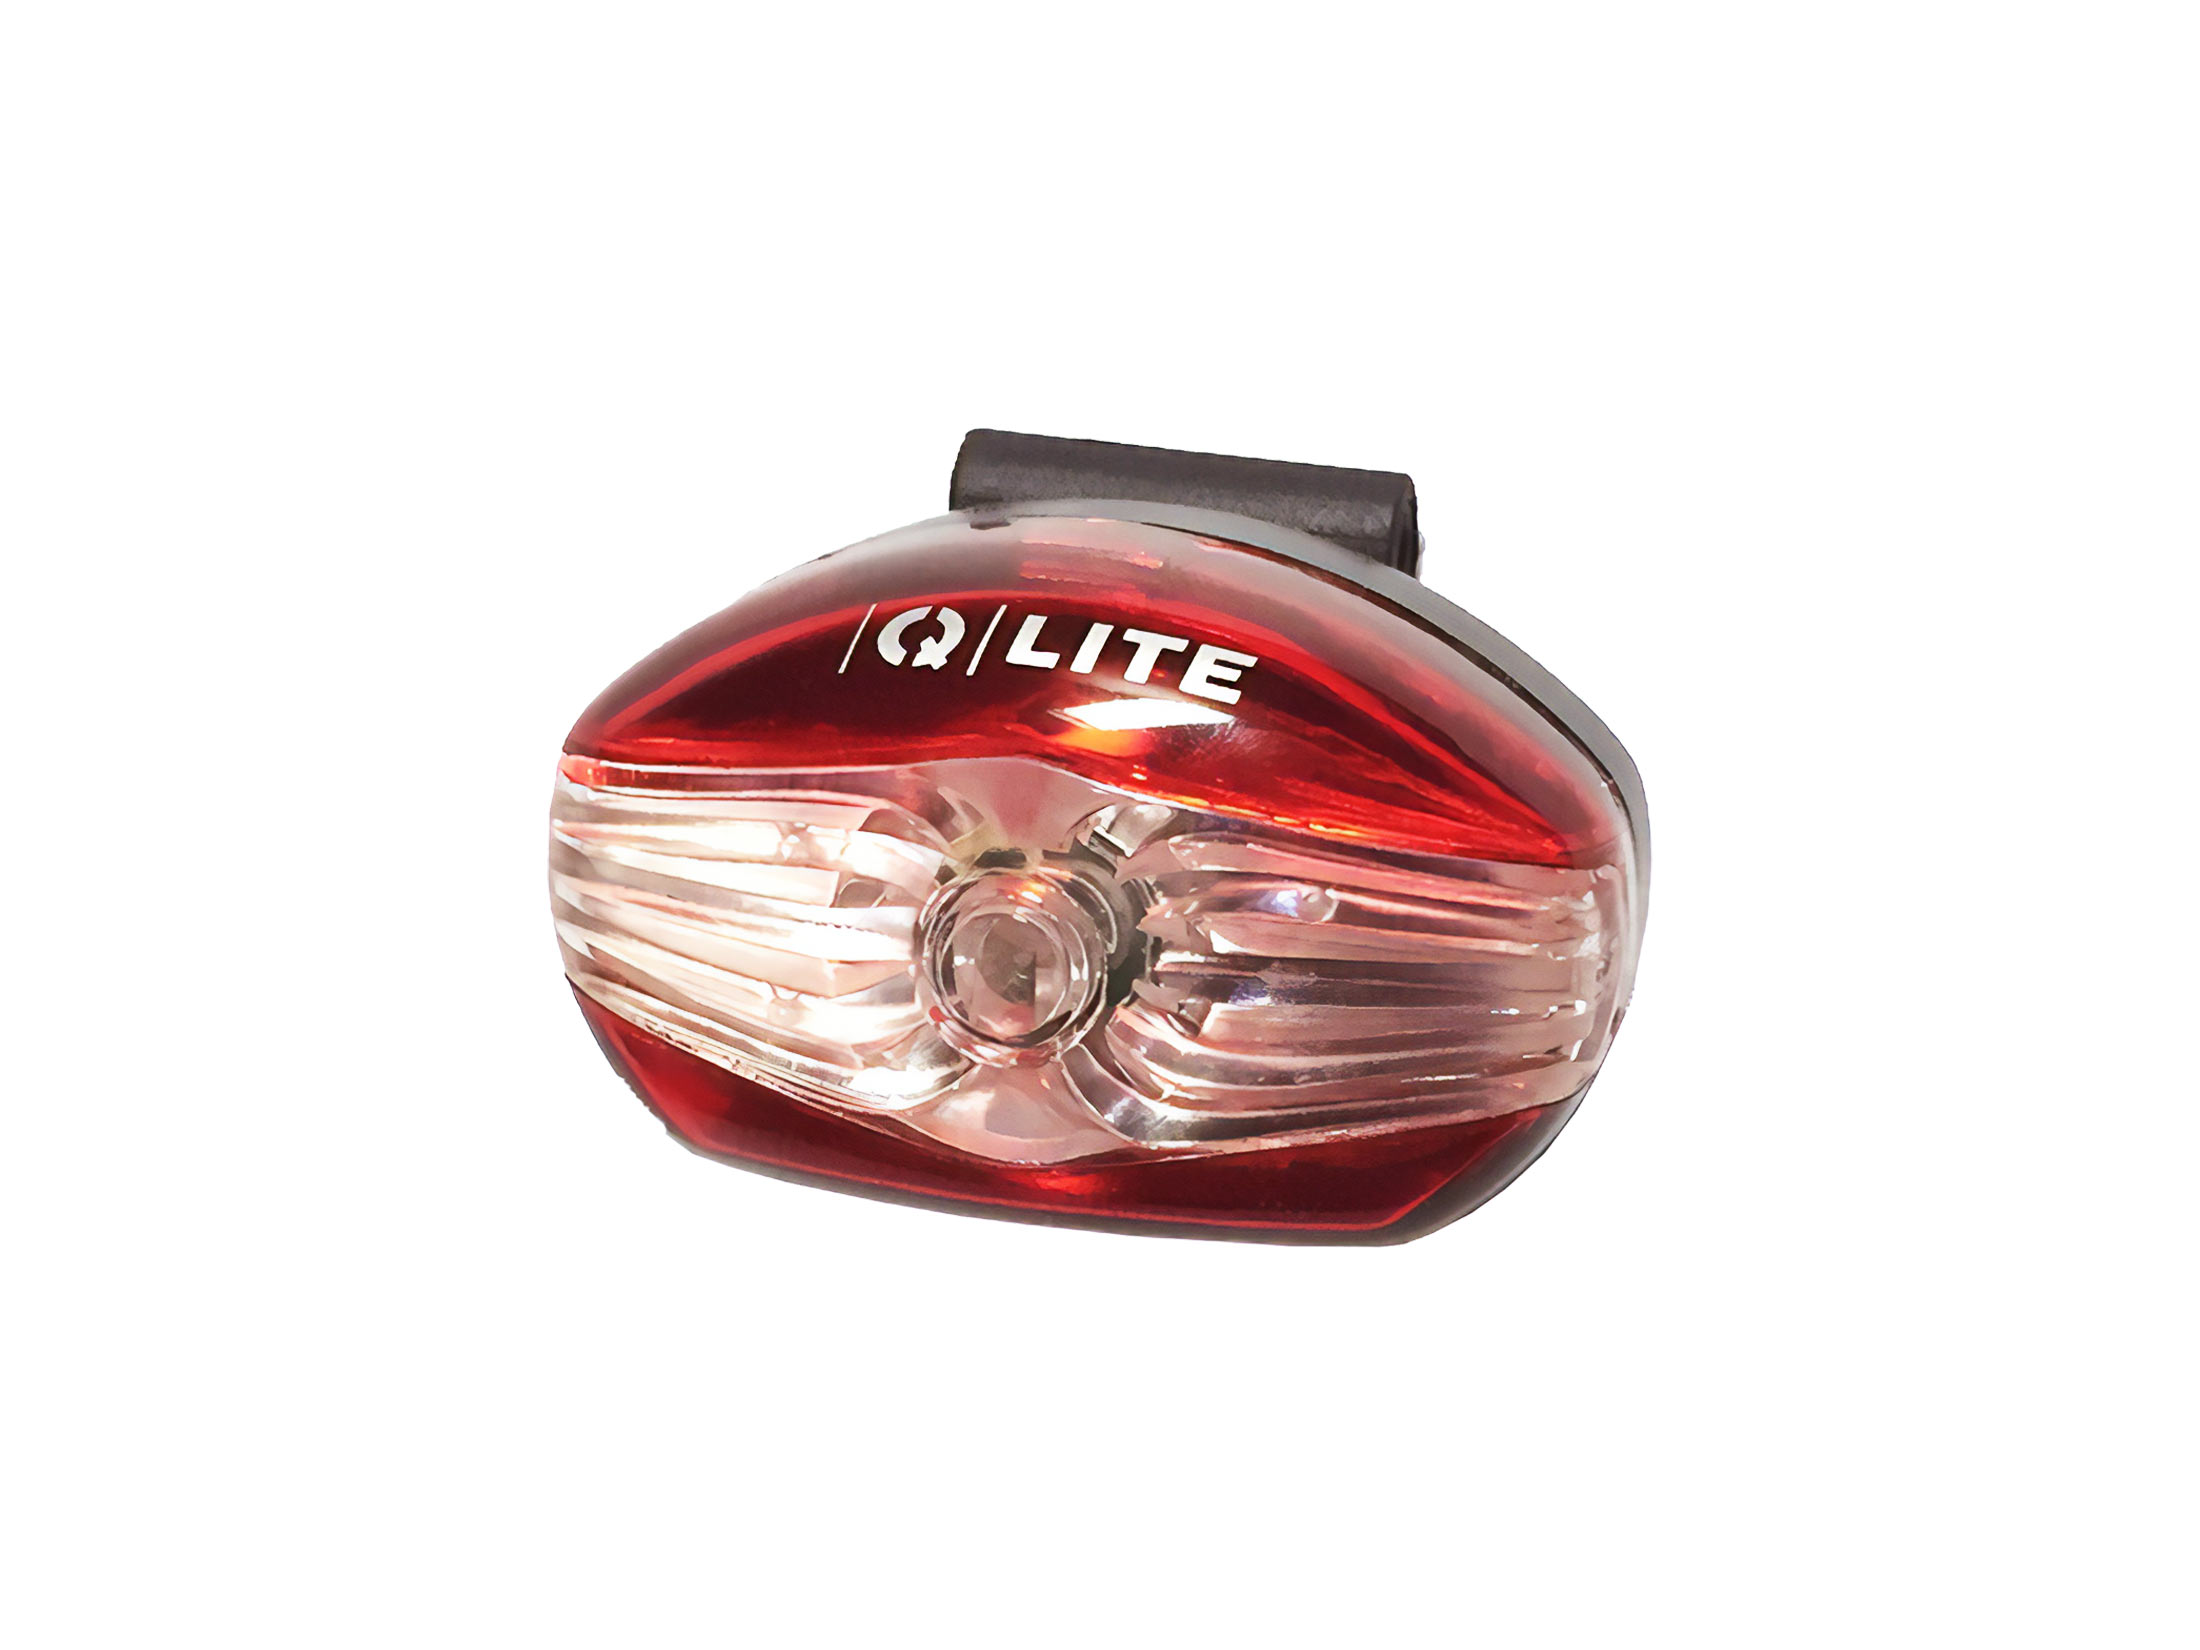 Q-Lite Star-Cute 1 Red LED Rear Bicycle Light